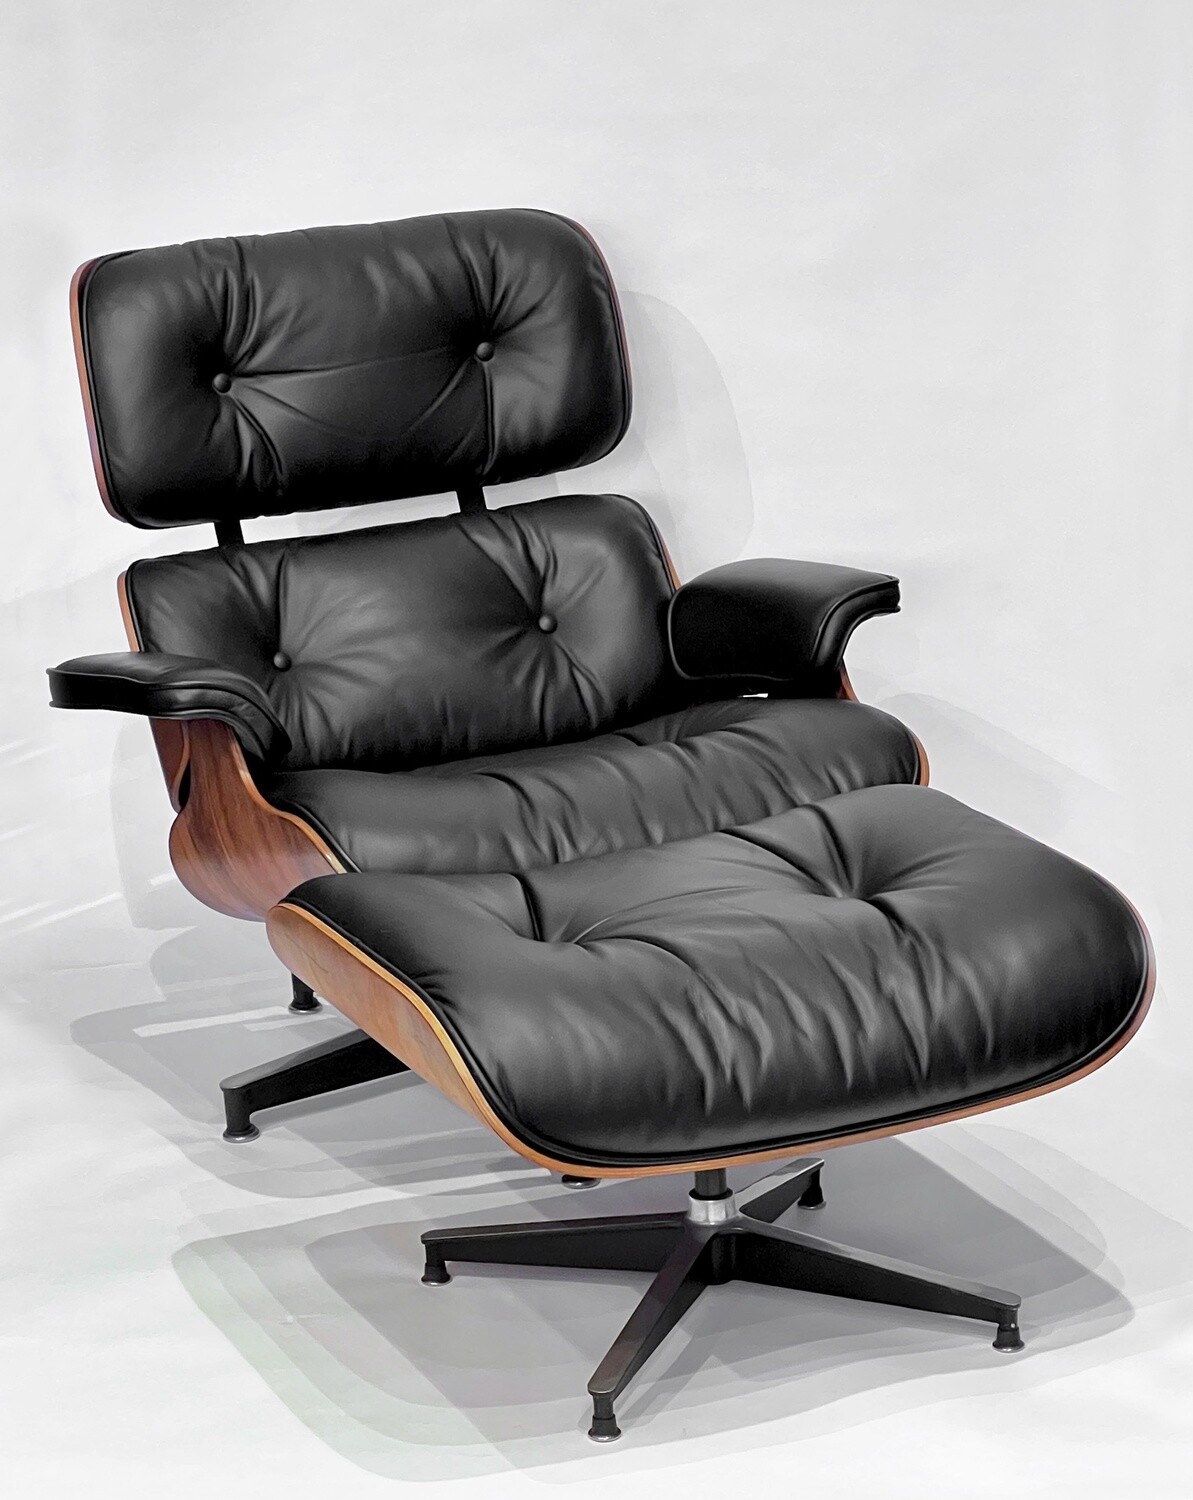 Eames Rosewood 670 Lounge Chair and 671 Ottoman by Herman Miller